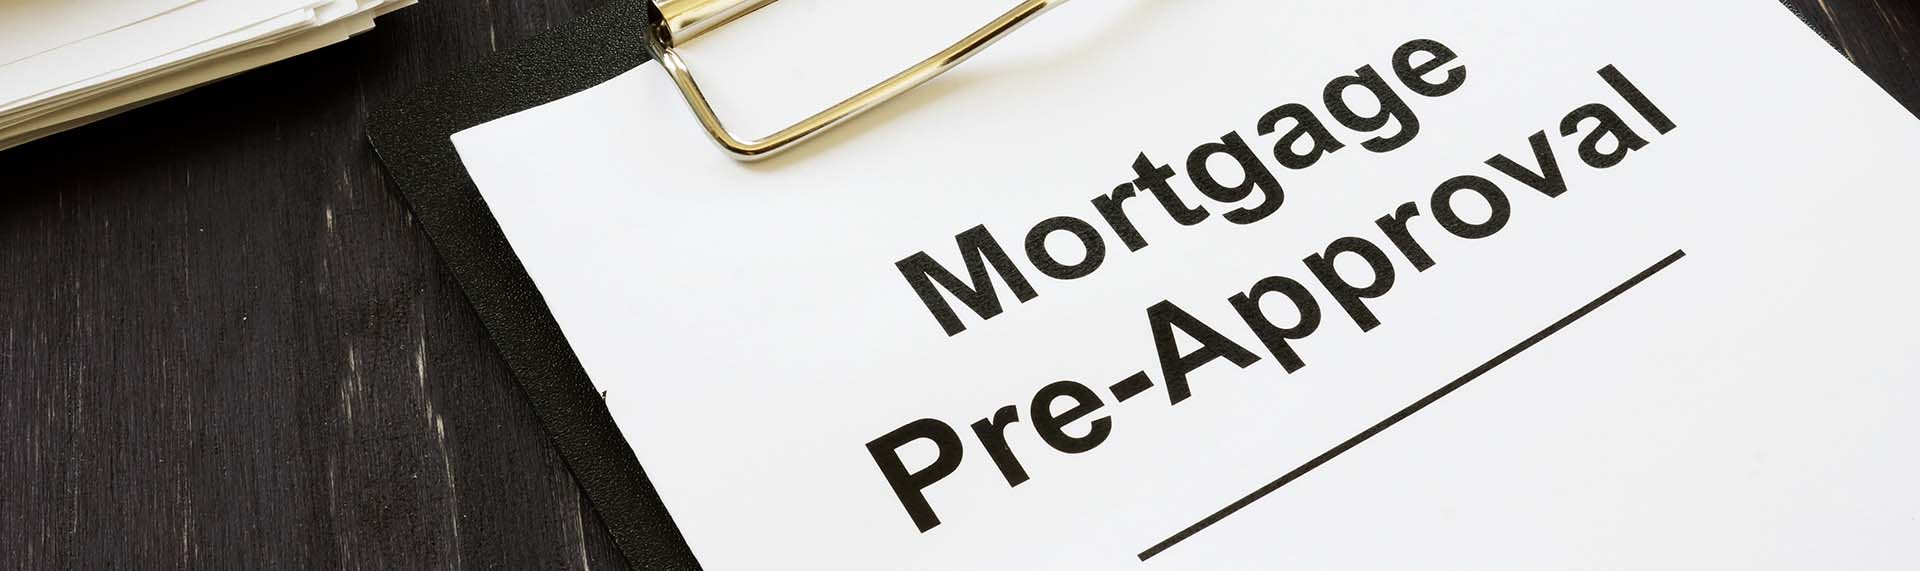 Pre-Approval from a Trusted Lender